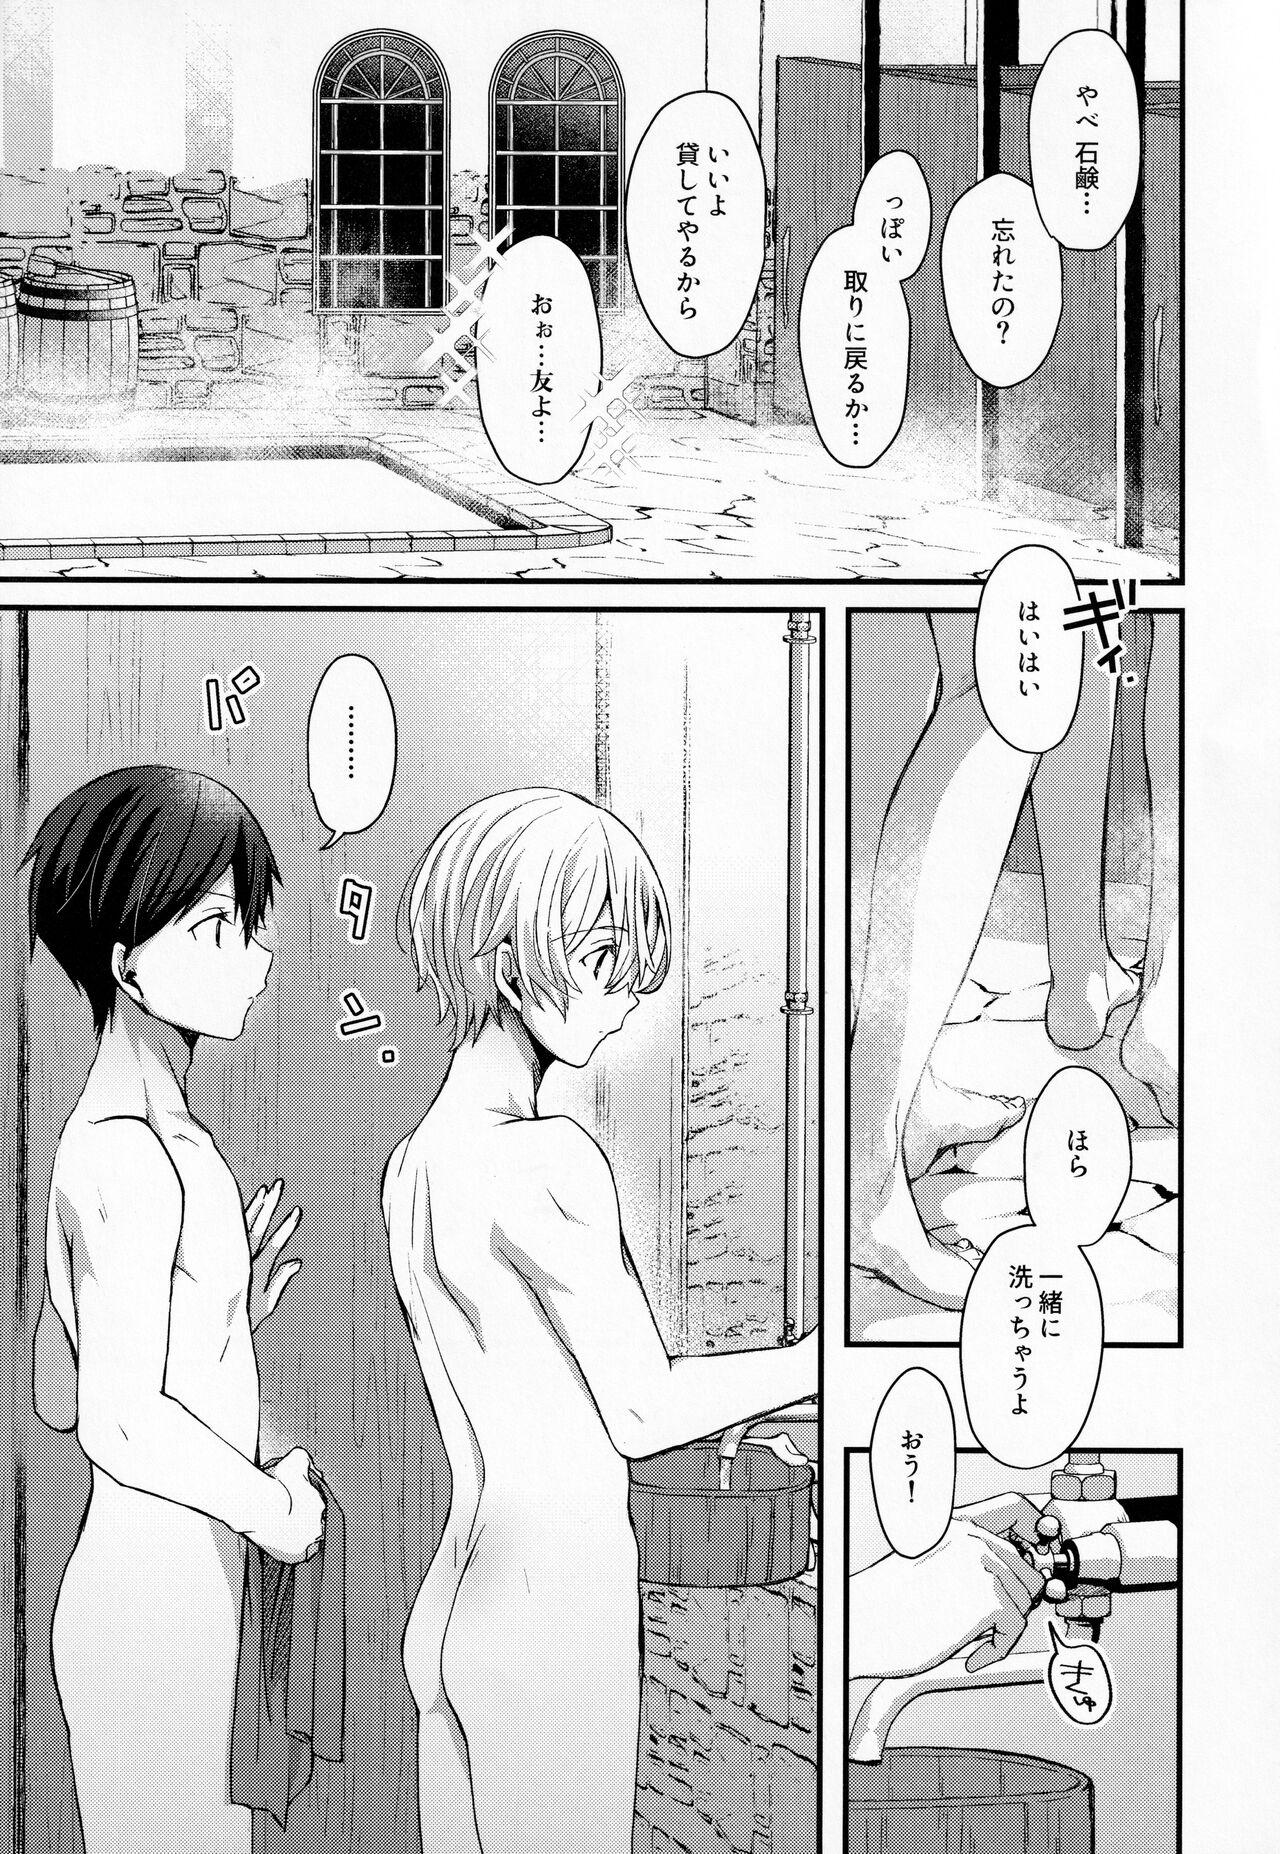 Ejaculation Gaman Shinaide - Sword art online Action - Page 4